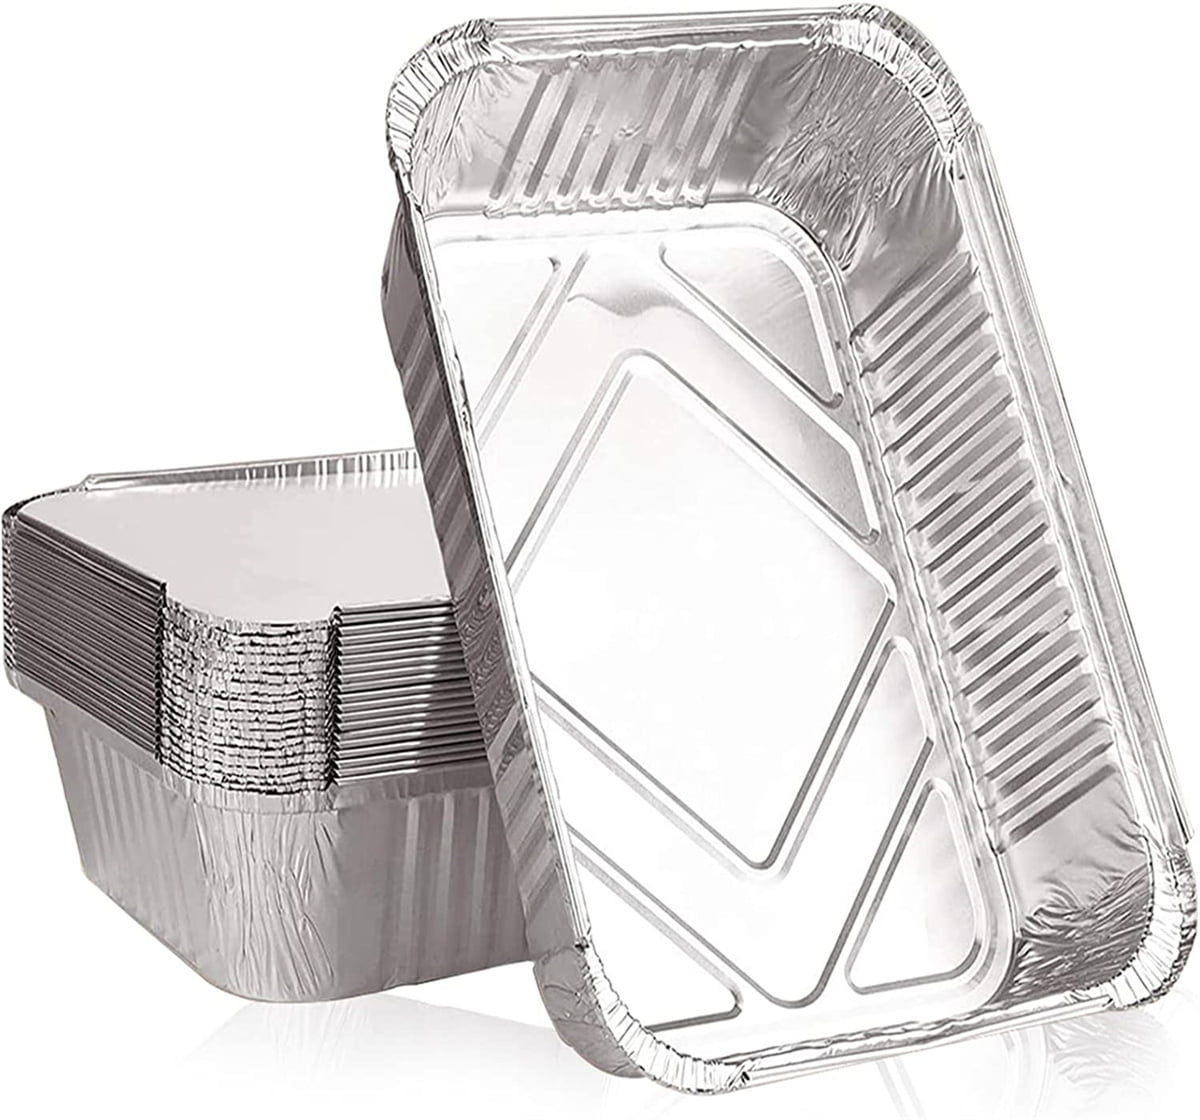 Handi-foil® Cook-n-Carry® Square Cake Pans and Lids - Silver/Blue, 3 pk / 8  x 8 in - Ralphs